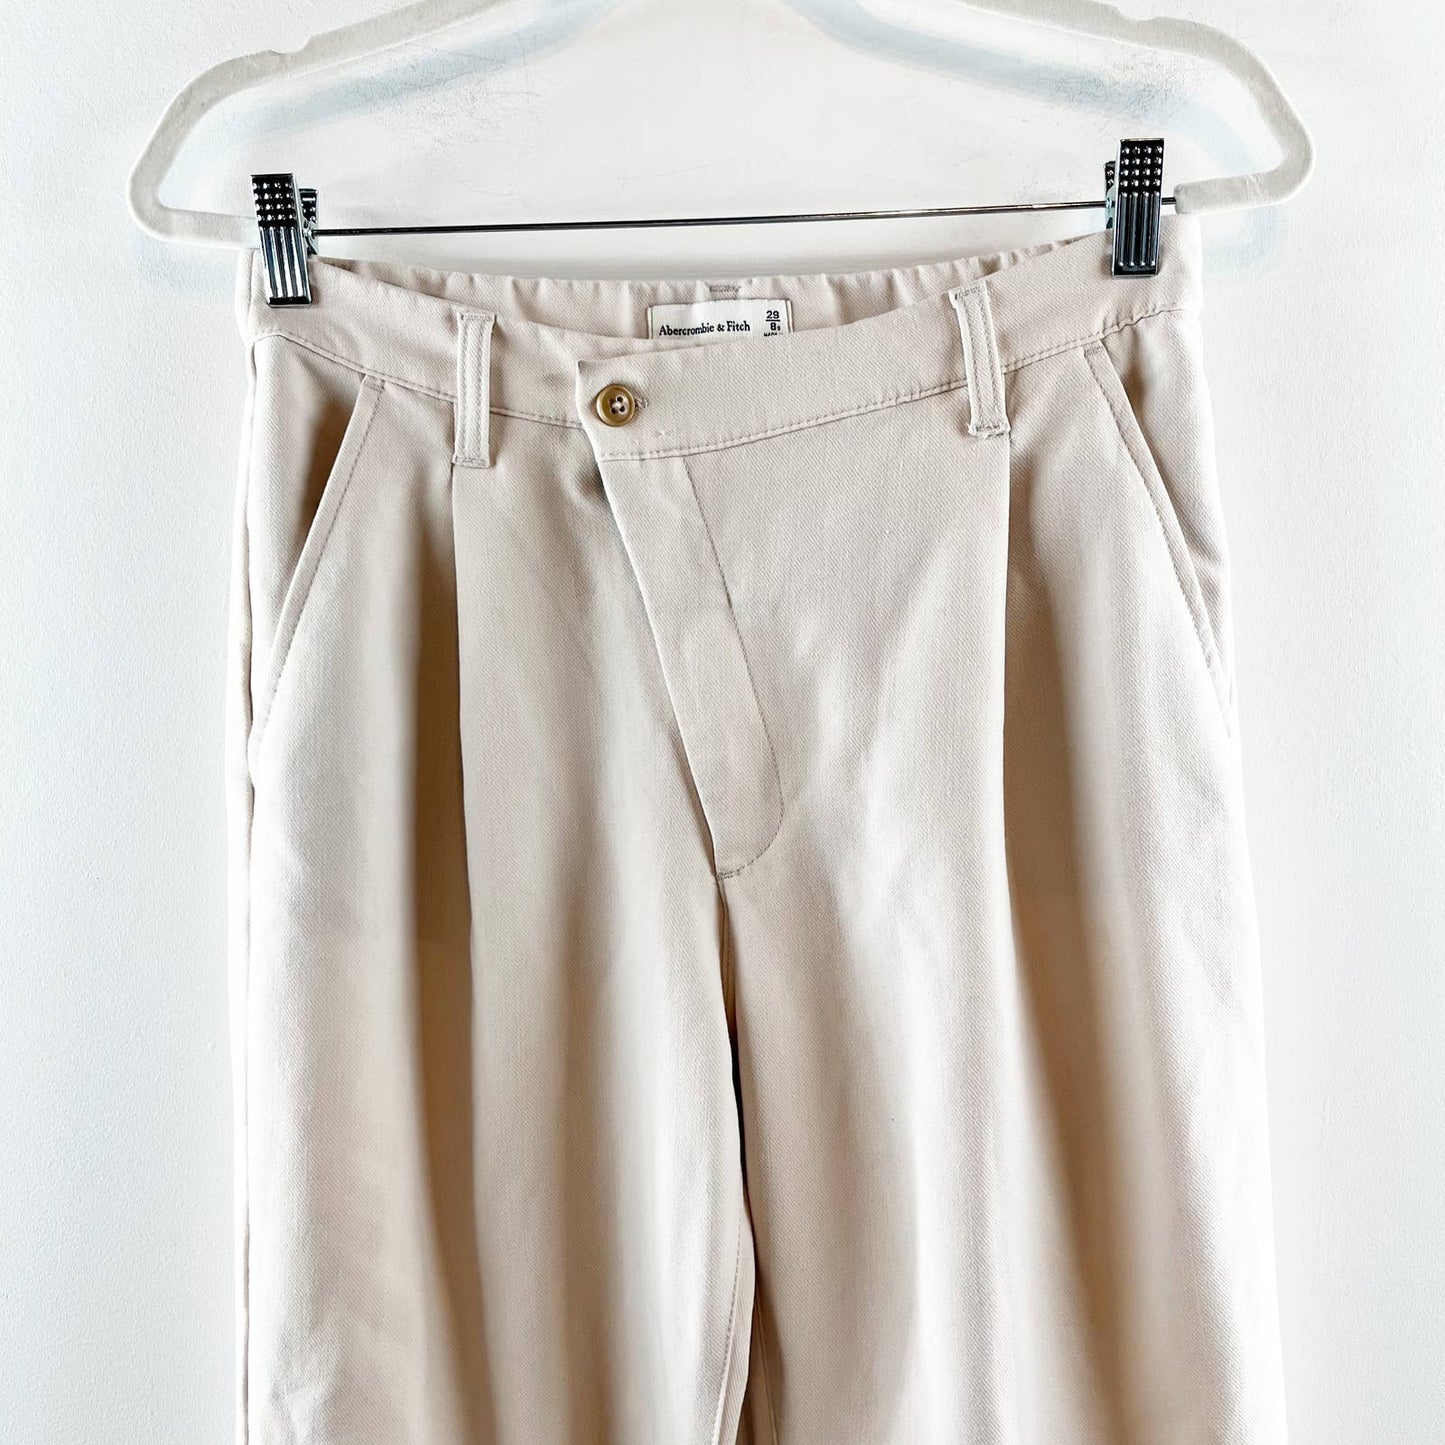 Abercrombie Tailored Relaxed High Rise Crossover Waistband Trouser Pants Tan 8 P